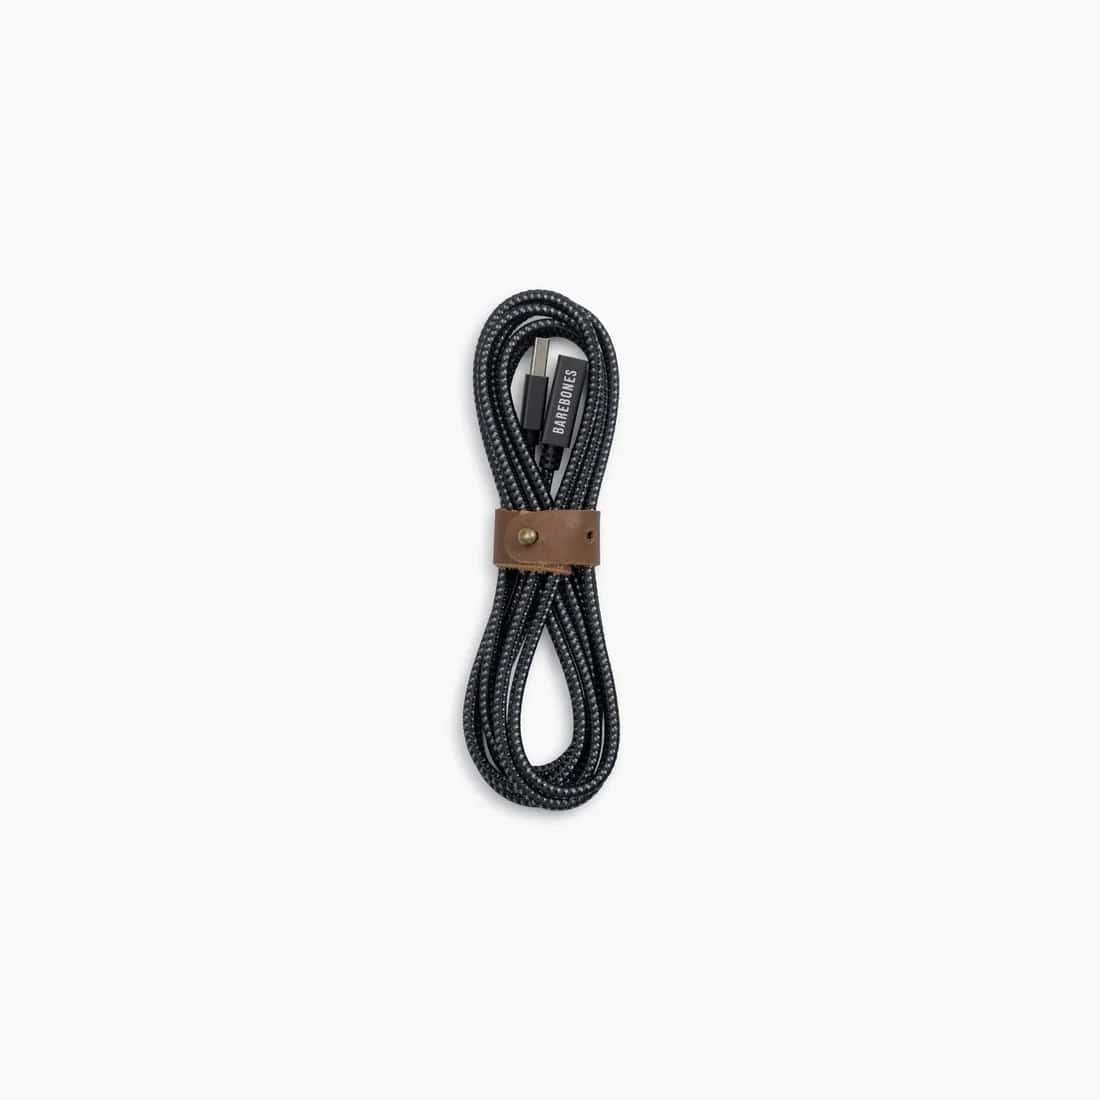 Barebones 2.0 USB Extension Cable - Kitchen King Direct